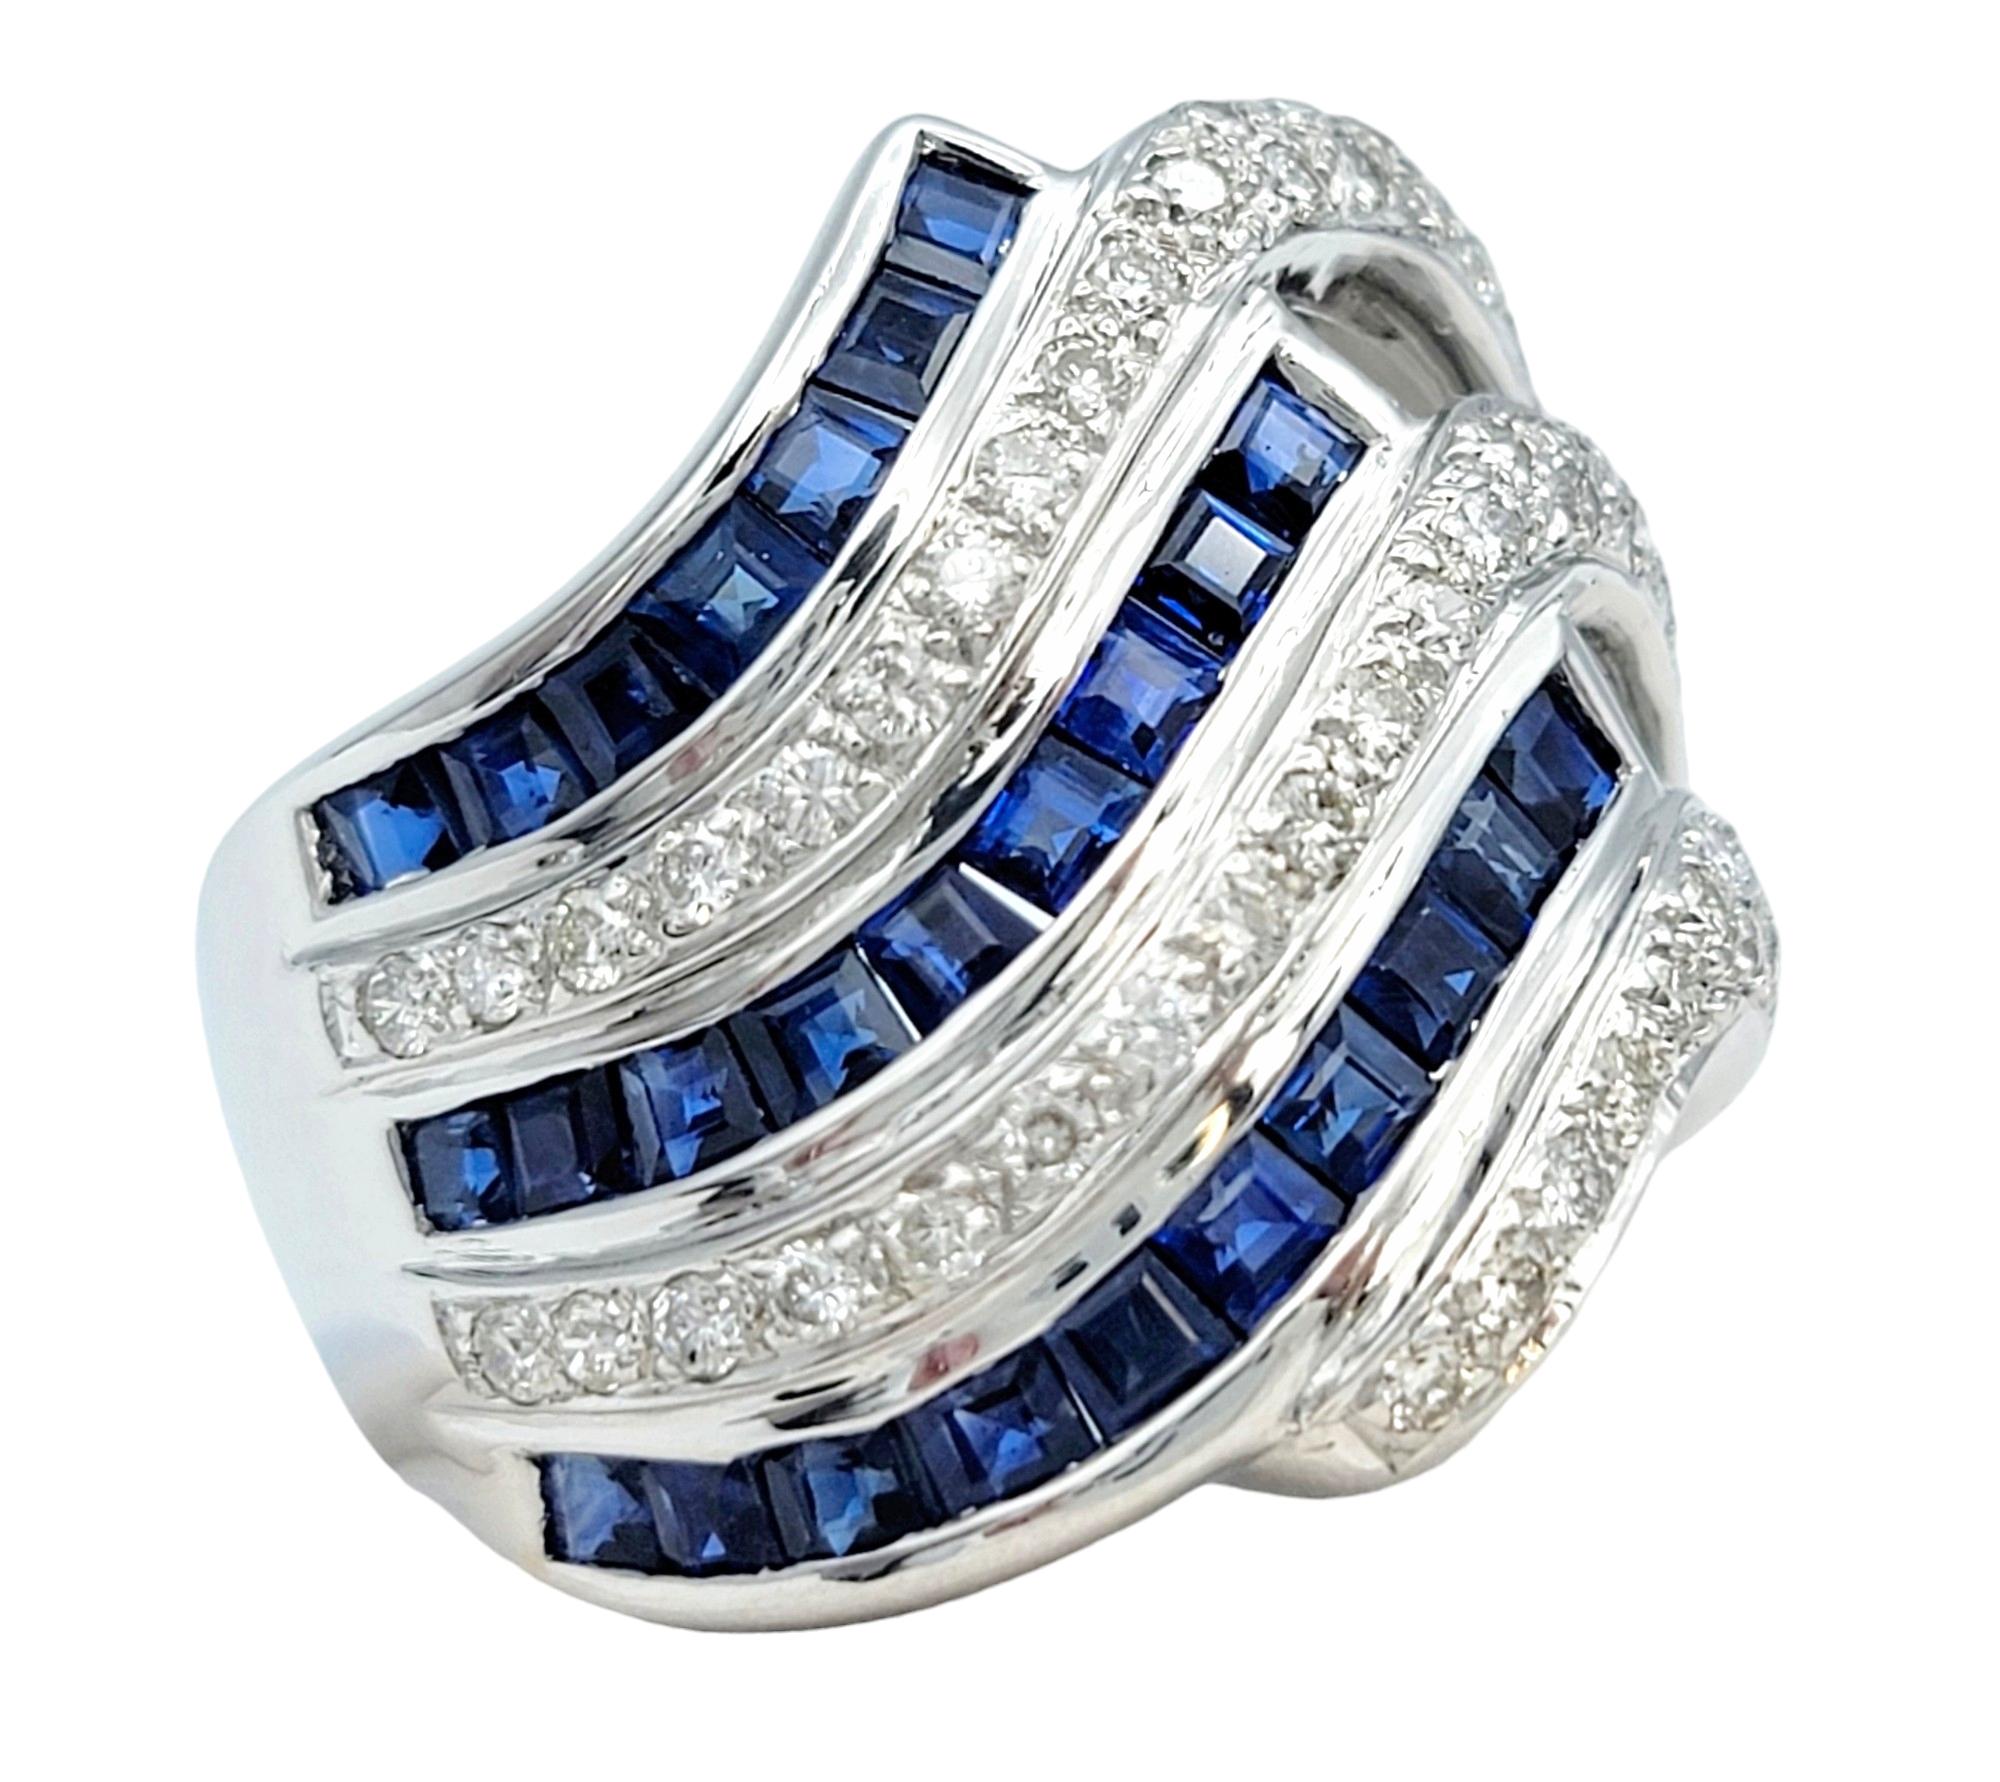 Ring Size: 7.5

This gorgeous ring, set in luxurious 18 karat white gold, is a distinctive and eye-catching piece with a unique wave design. The slightly slanted wave pattern alternates rows of princess-cut blue sapphires and round diamonds,